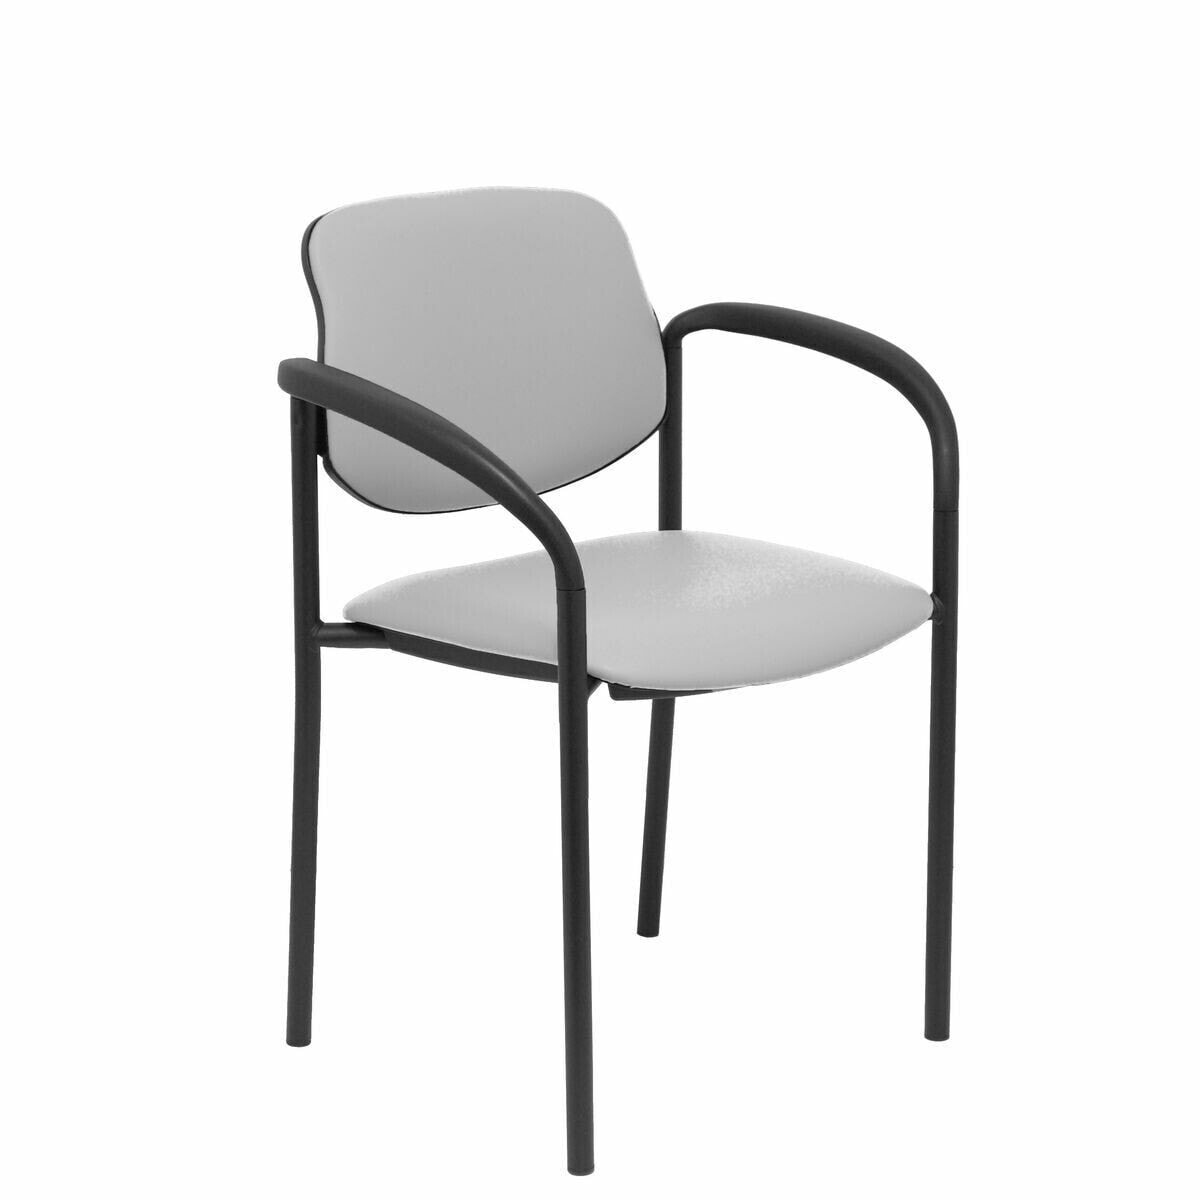 Reception Chair Villalgordo P&C NSPGRCB With armrests Grey